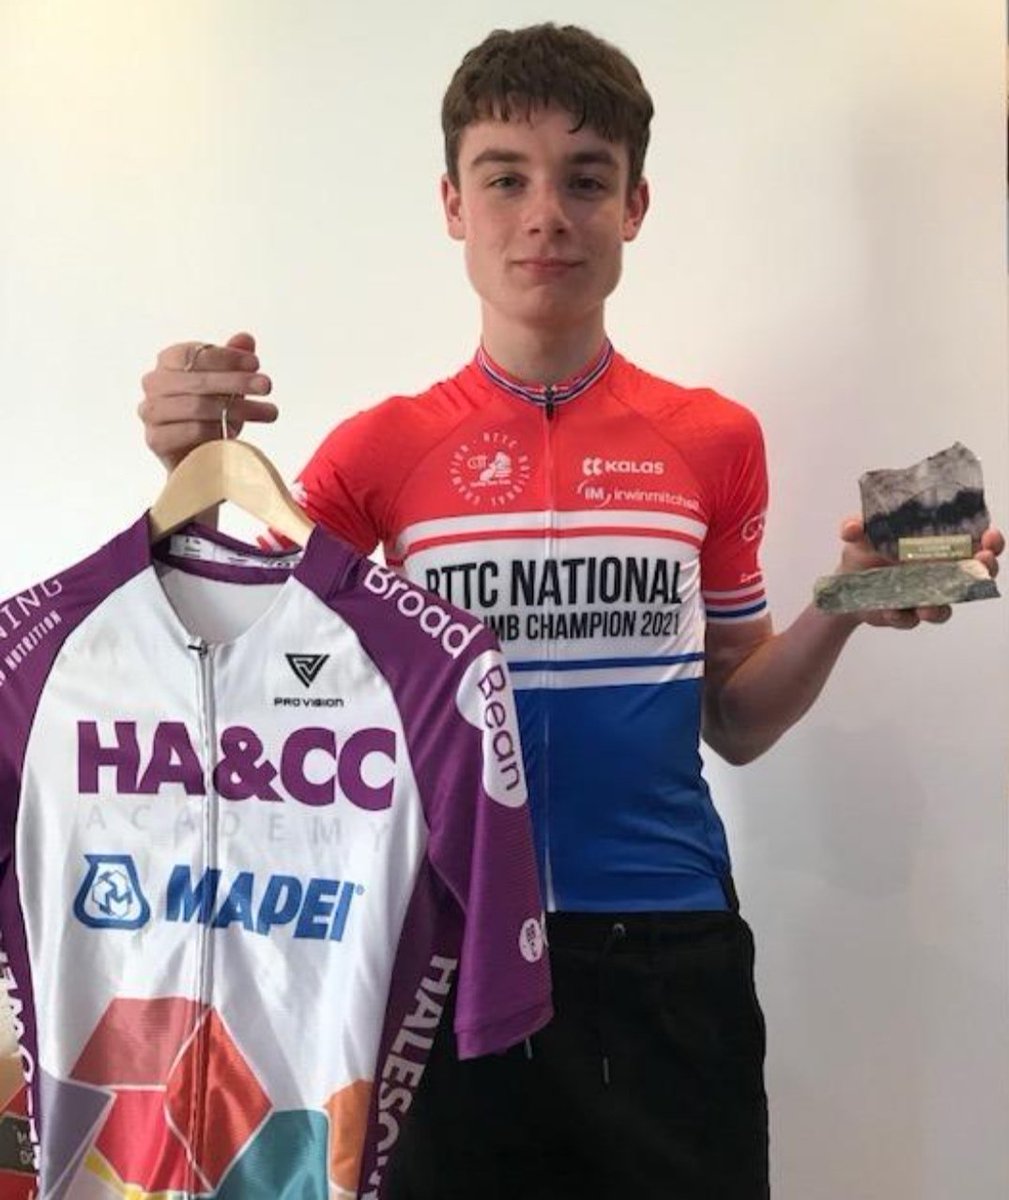 Tomos Pattinson celebrating being crowned the national hill climb champion. Tomos won the junior title for RTTC National Hill Climb Championship. Tomos was also awarded the club's Mapei Trophy, for the most improved HACC Academy rider. @MapeiUKLtd @dudleymbc @haccacademy